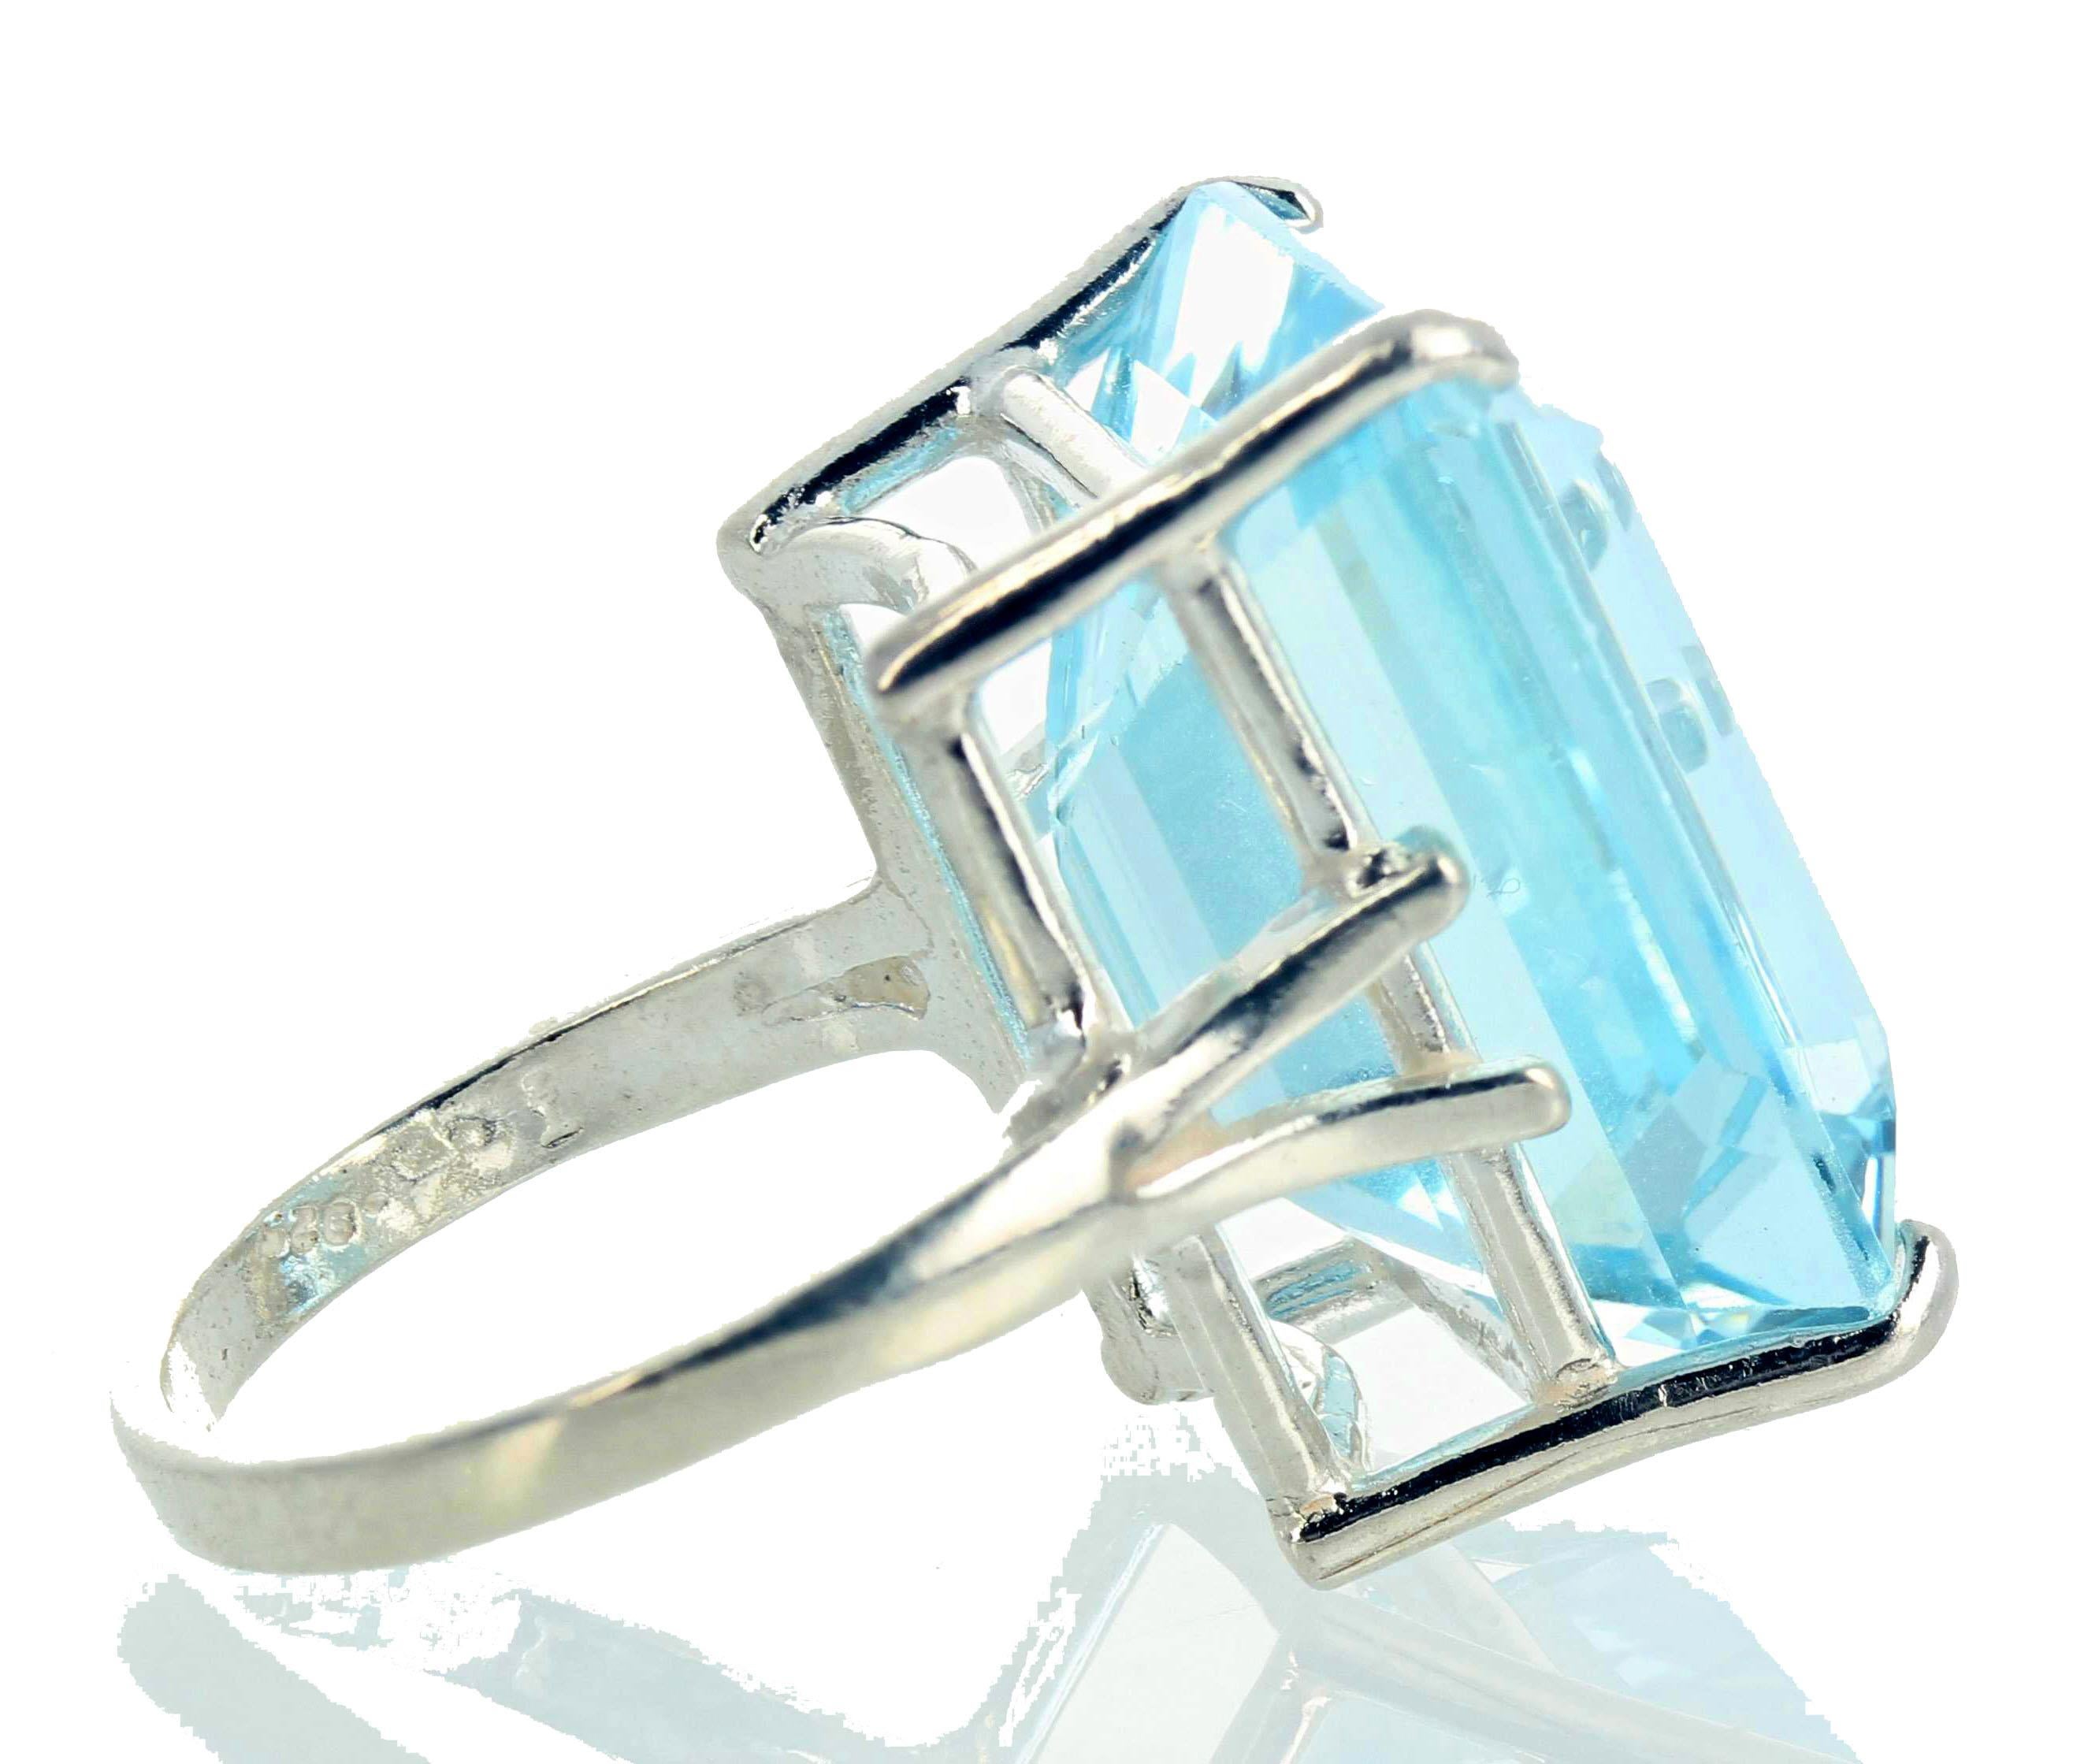 AJD Gorgeous REAL Cushion Cut 18 Ct Natural Aquamarine Silver Solitaire Ring 2